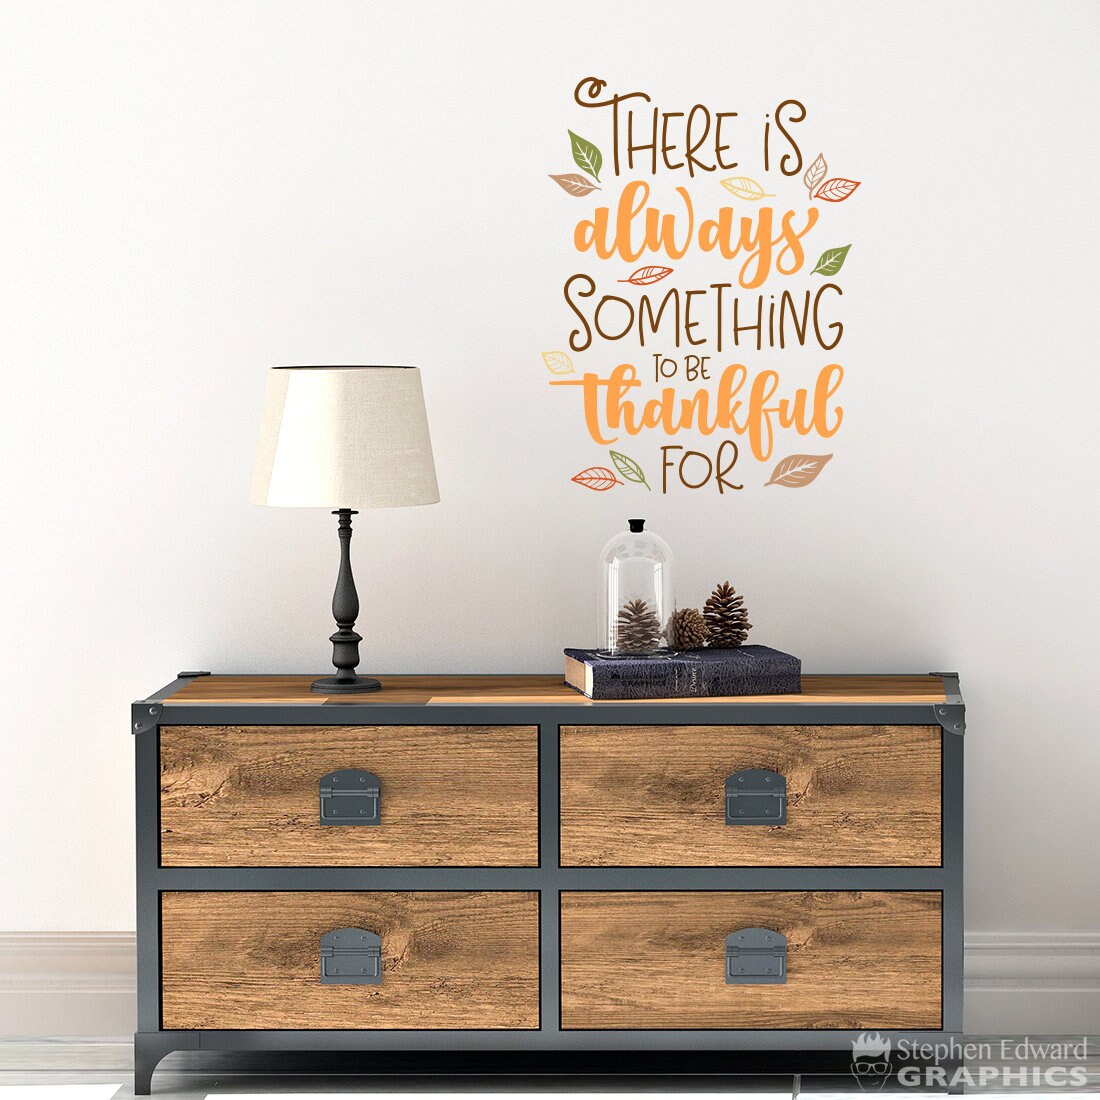 There is always something to be thankful for Printed Decal - Kitchen Dining Room Decor - Colorful Quote Wall Sticker